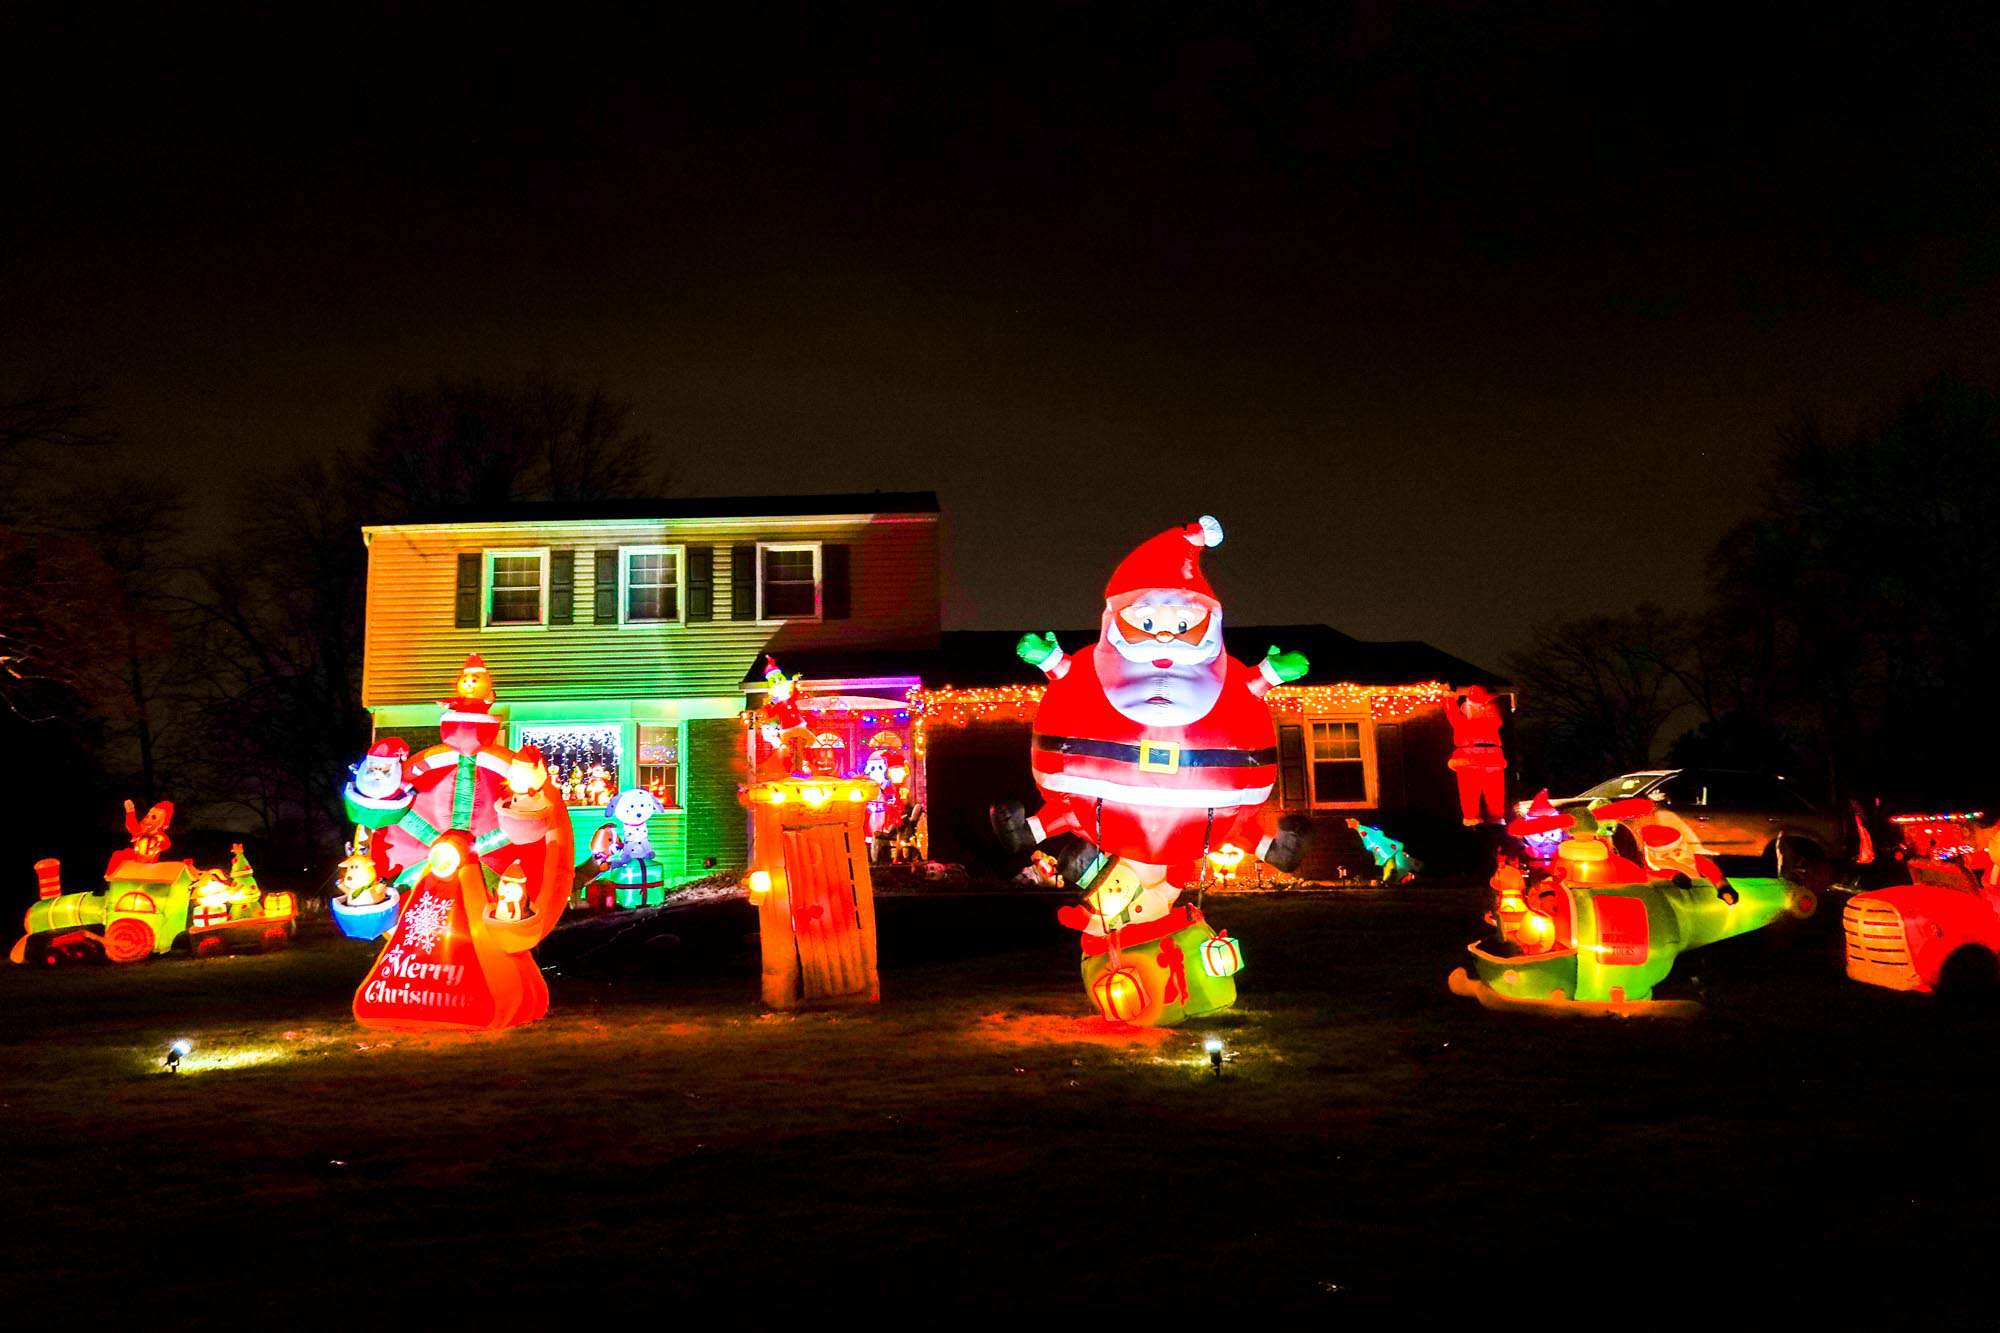 Inflated Christmas lawn decorations, including a Santa